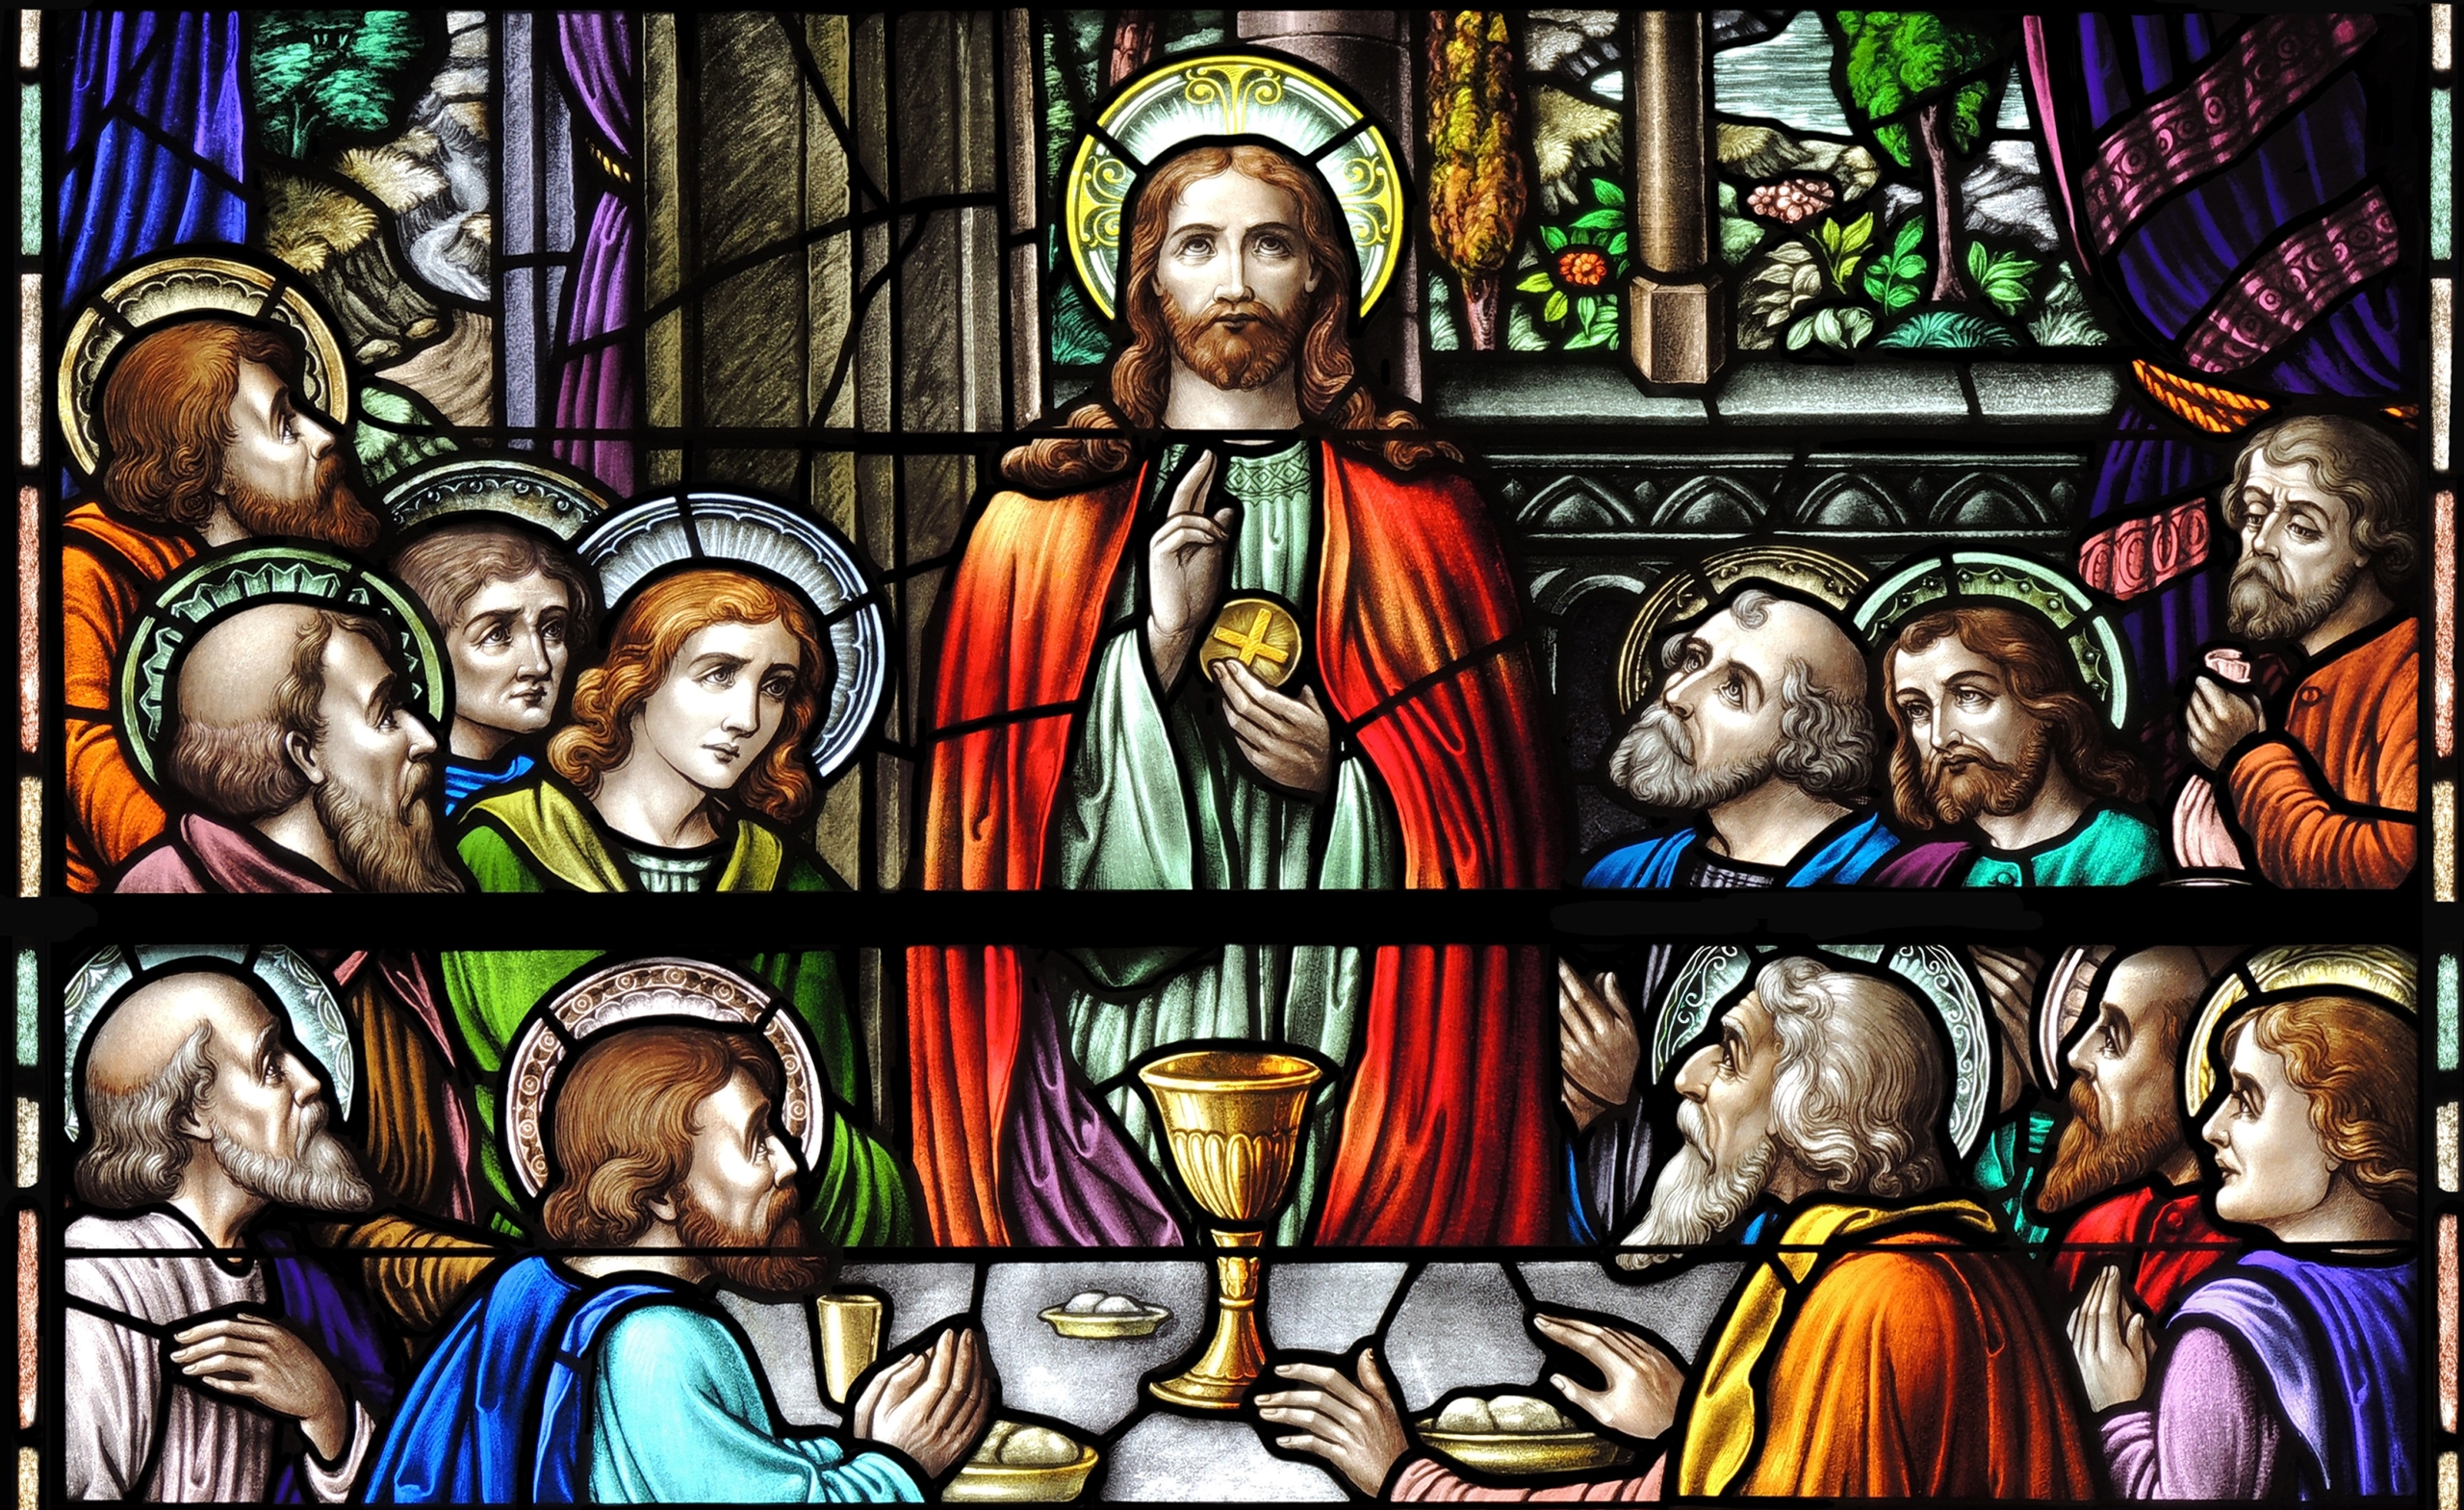 Last Supper stained glass at St. Joseph Catholic Church in Somers, NY